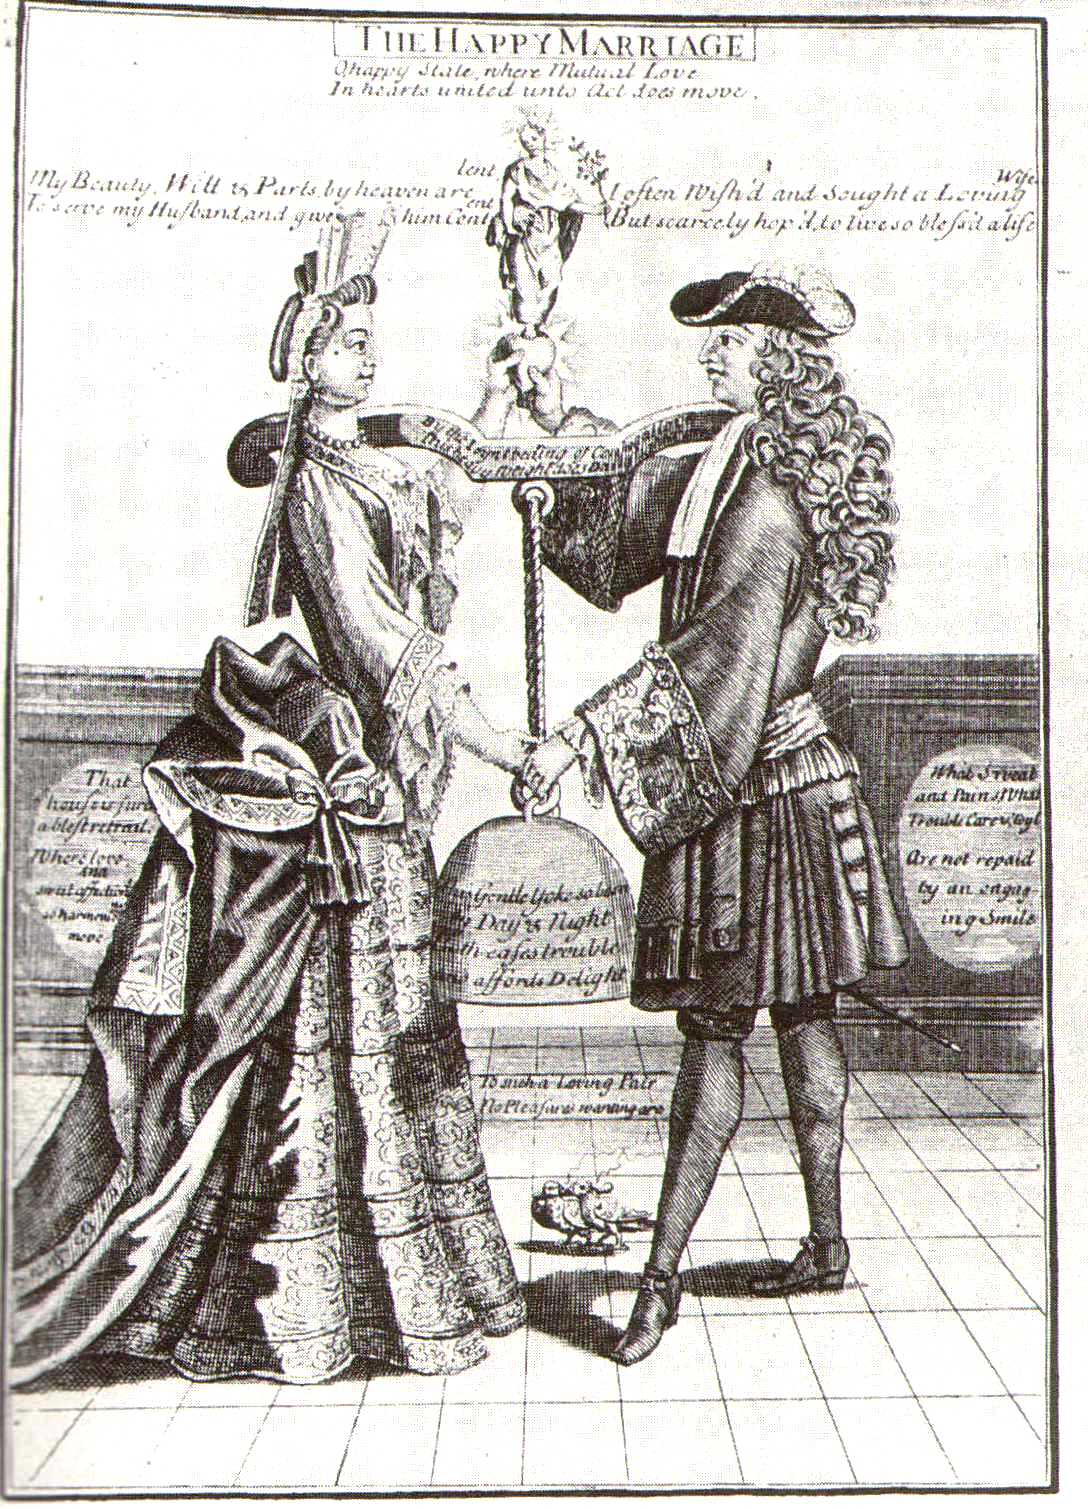 "Satire on marriage," Anonymous, 1700